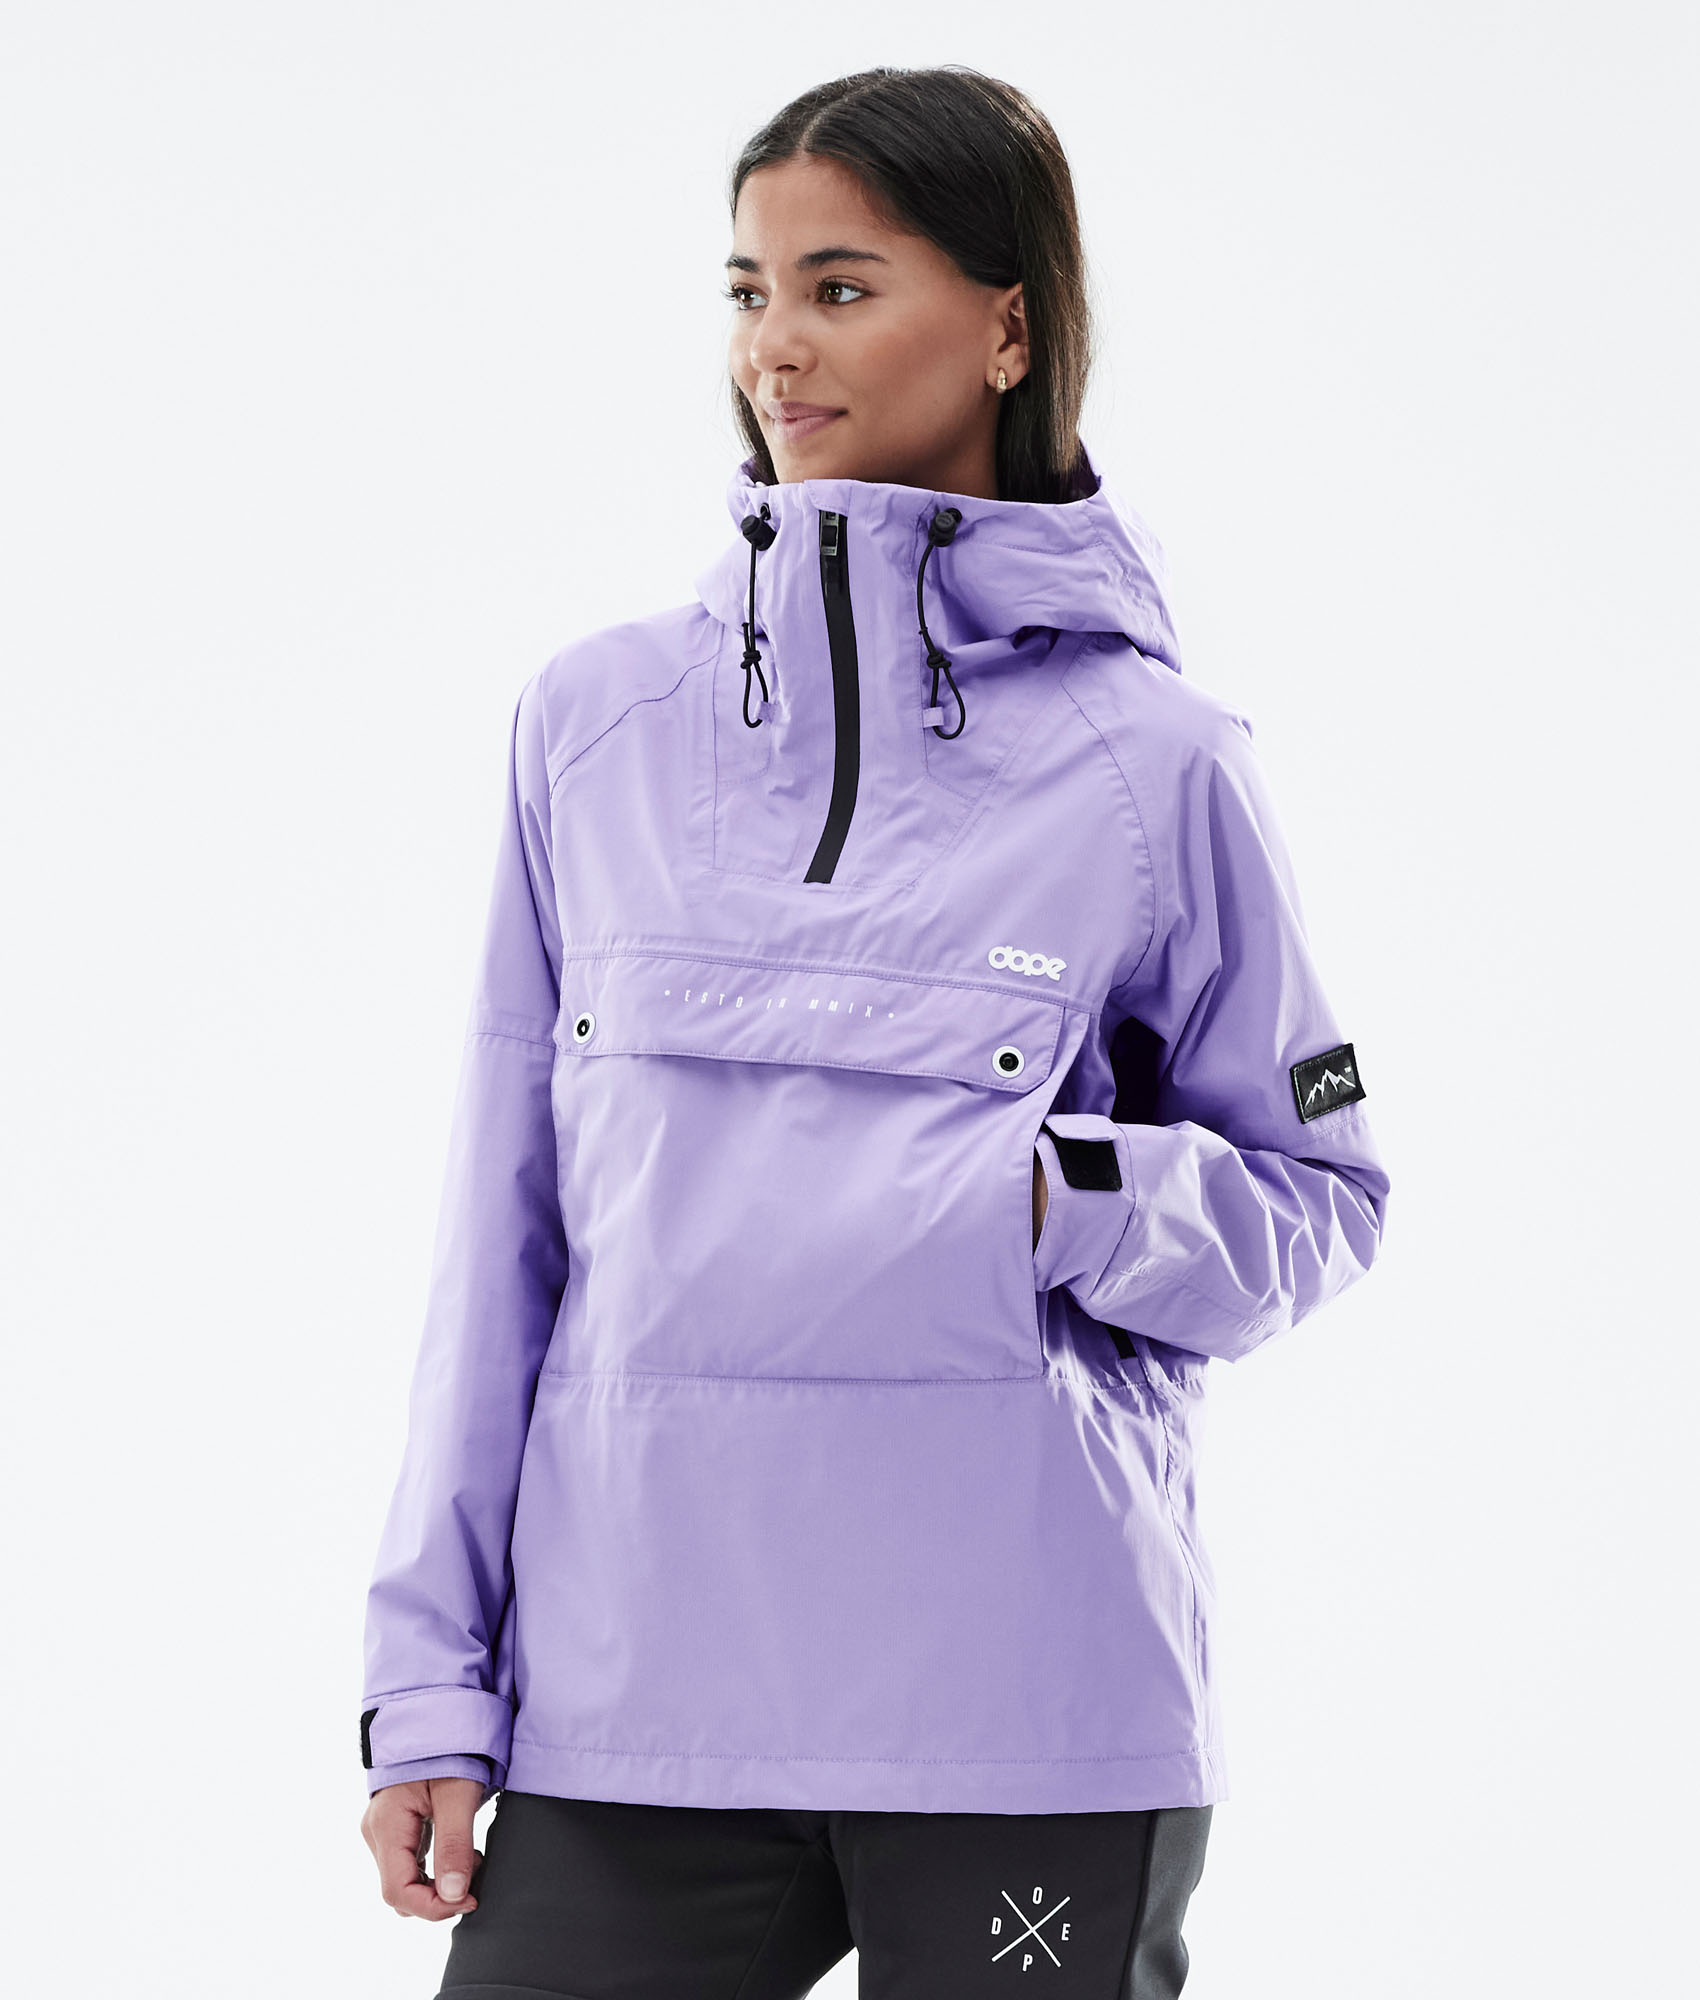 Women's Hiking Jackets | Free Delivery | Dopesnow.com